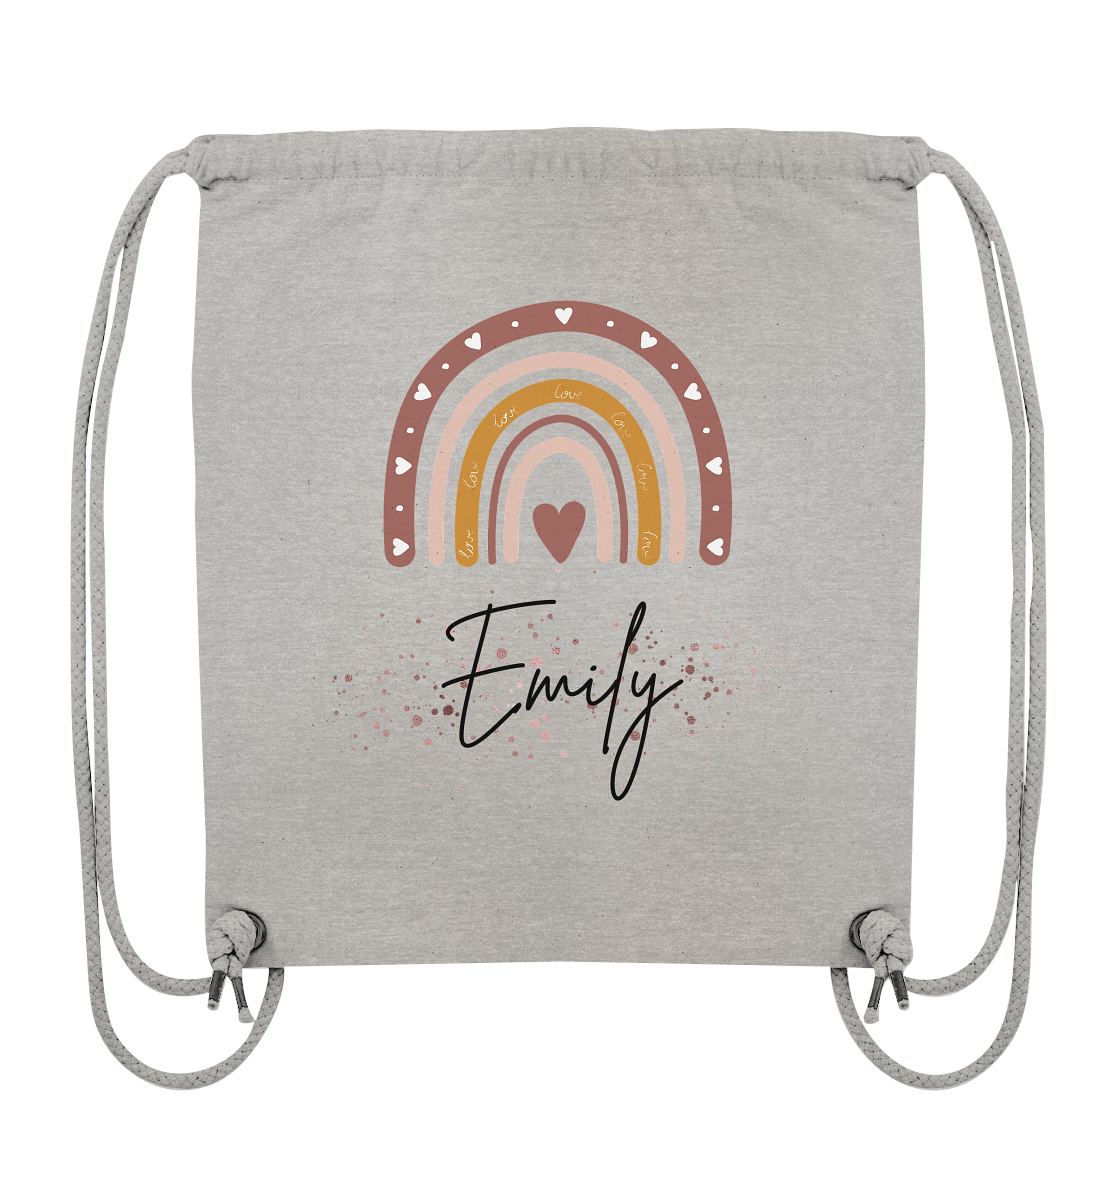 Gymnastics bag/fabric bag in a boho rainbow design personalized with your name